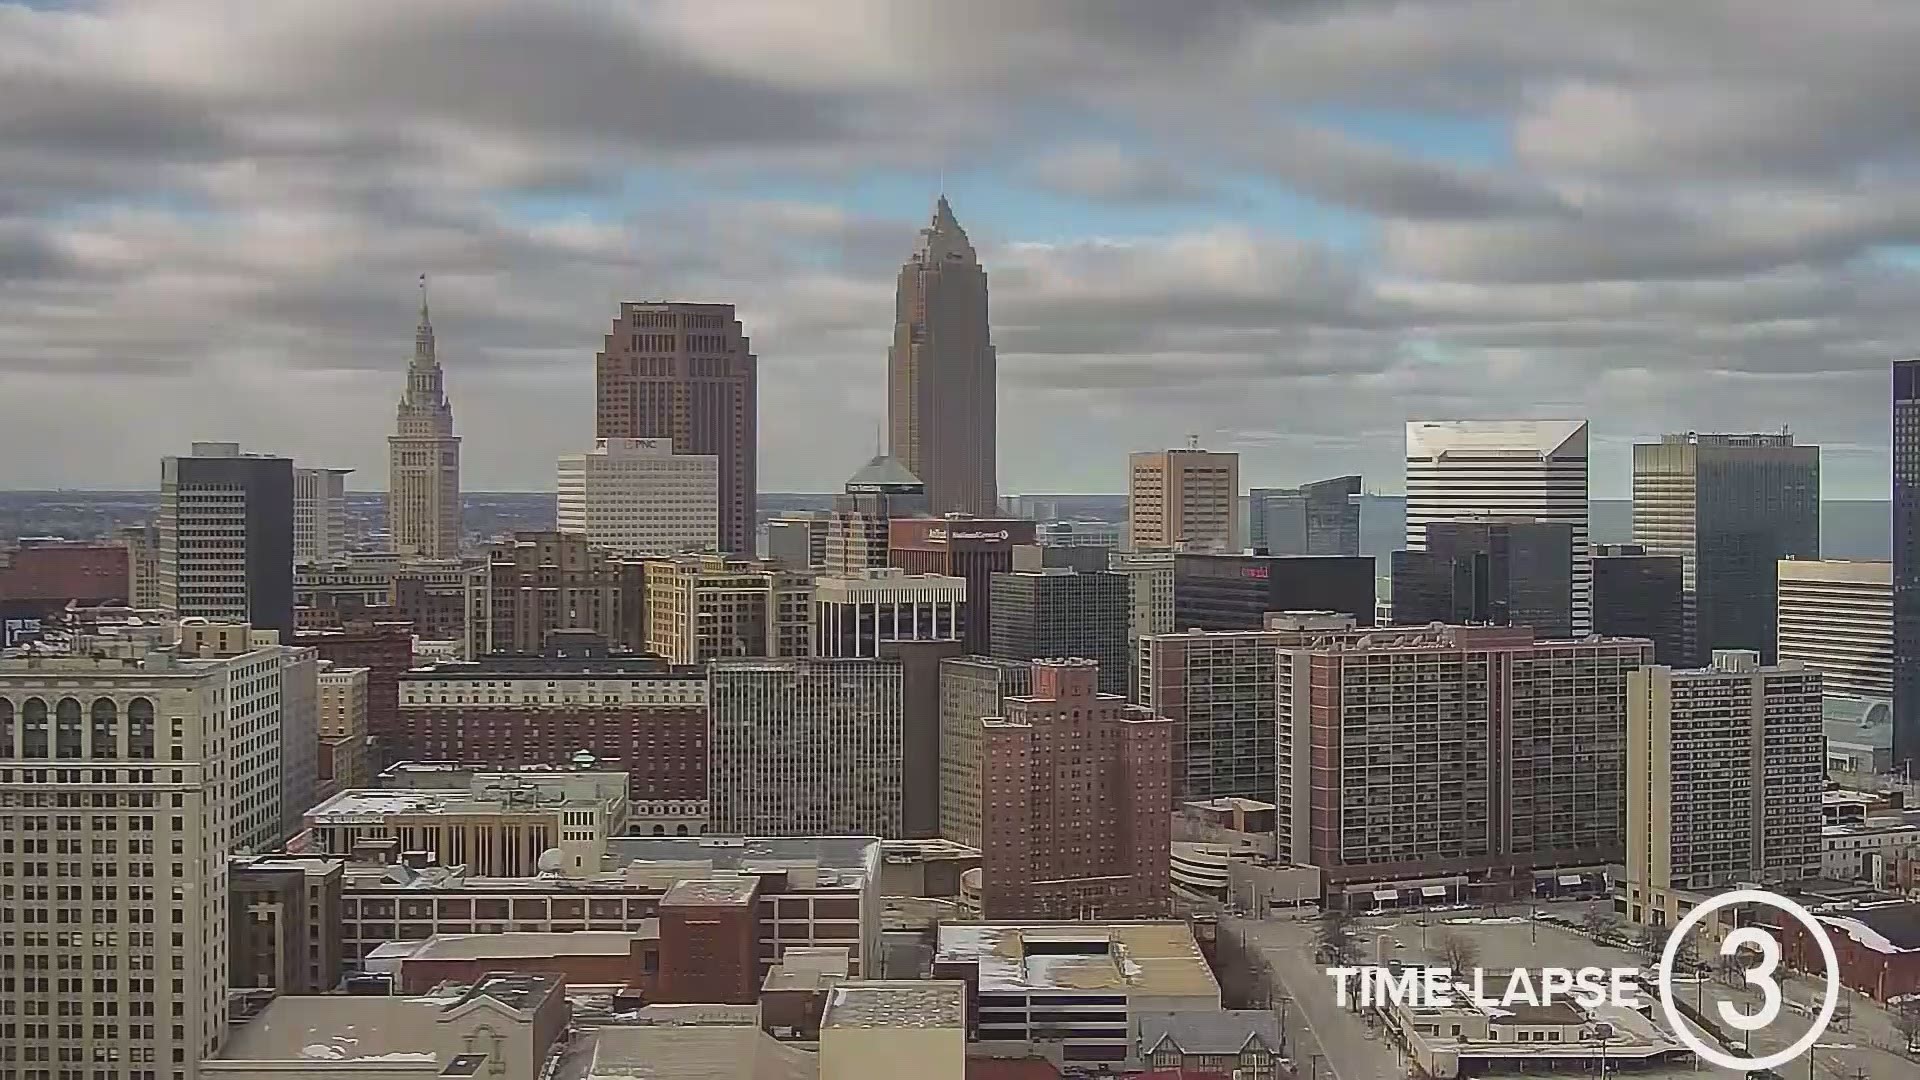 Check out Saturday's sunny Cleveland weather time-lapse from the WKYC Studios CSU Cam. #3weather